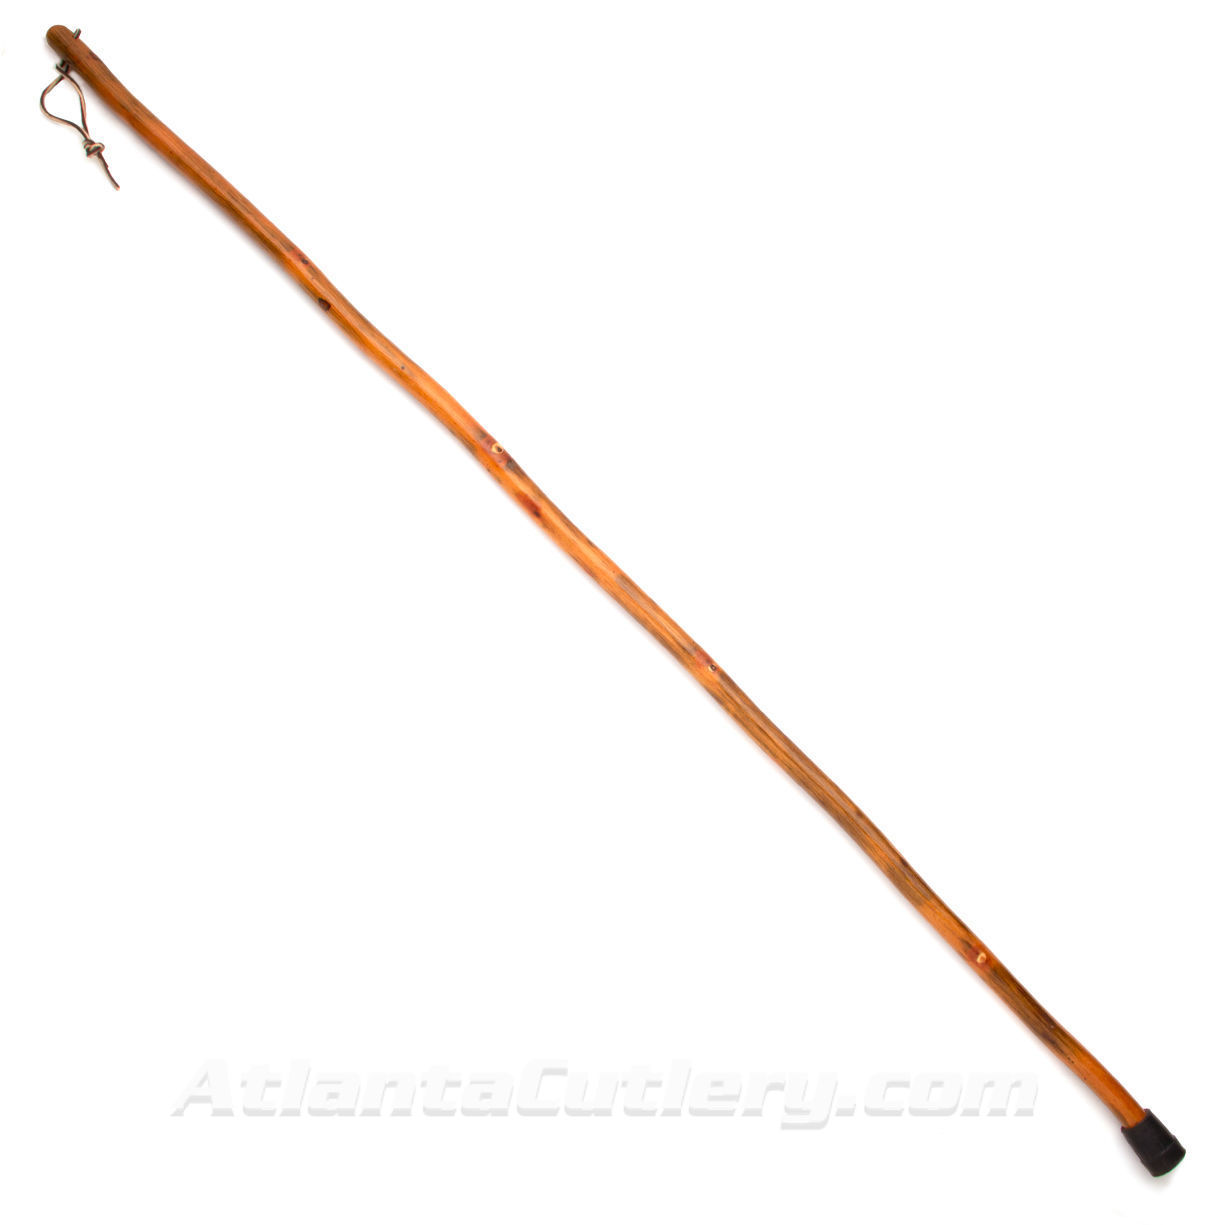 Whistle Creek Scout Hickory Walking Staff made in USA is weatherproofed, great for ladies, kids, scouts